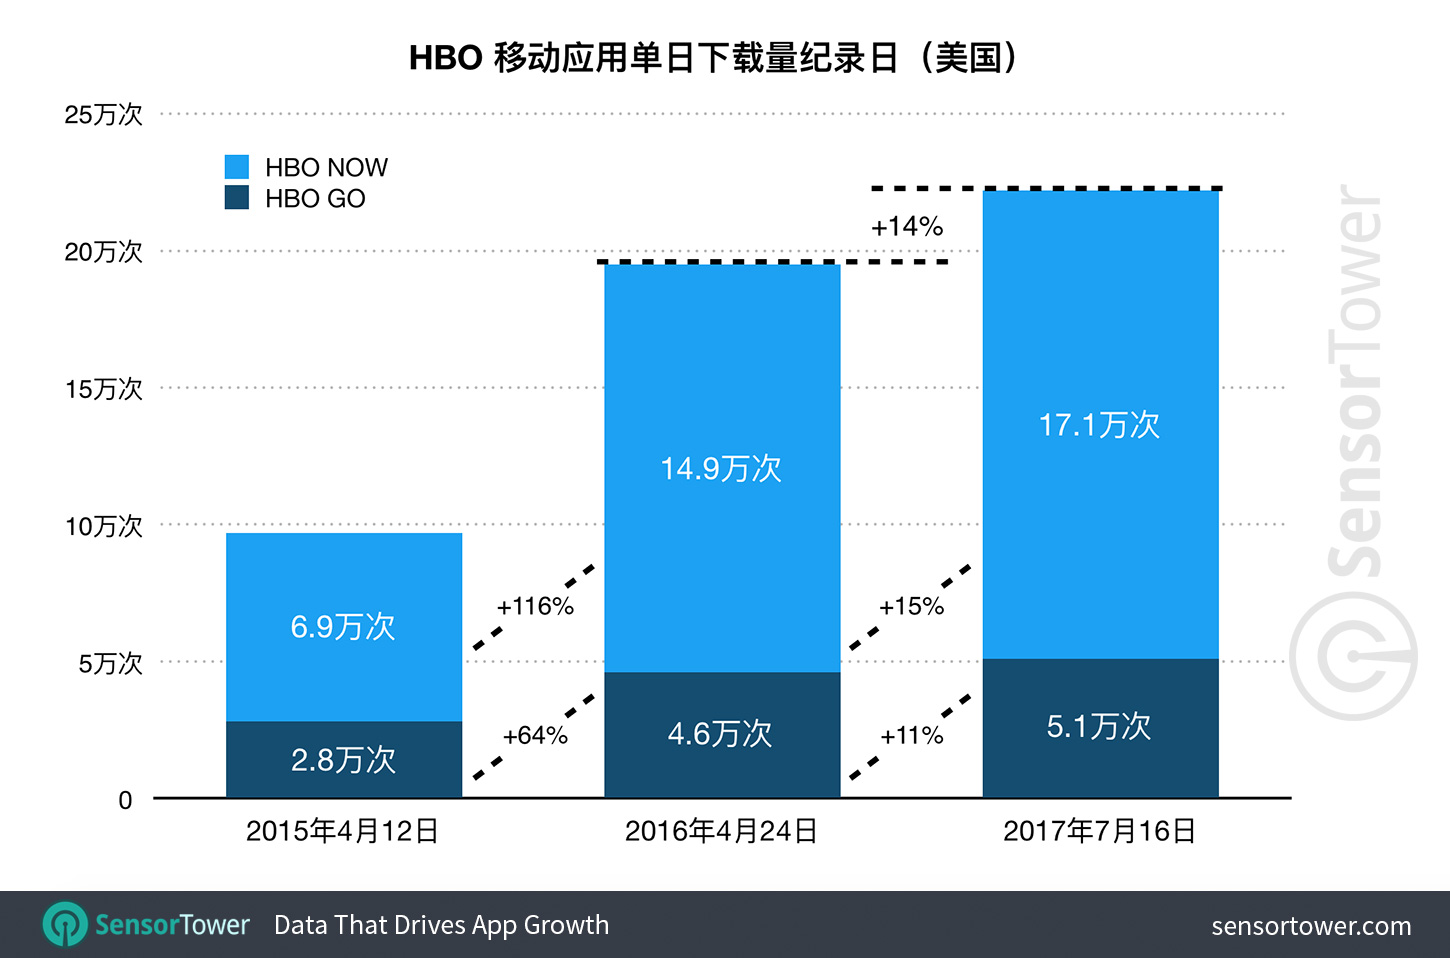 HBO GO and HBO Now comparison of historic highest download days